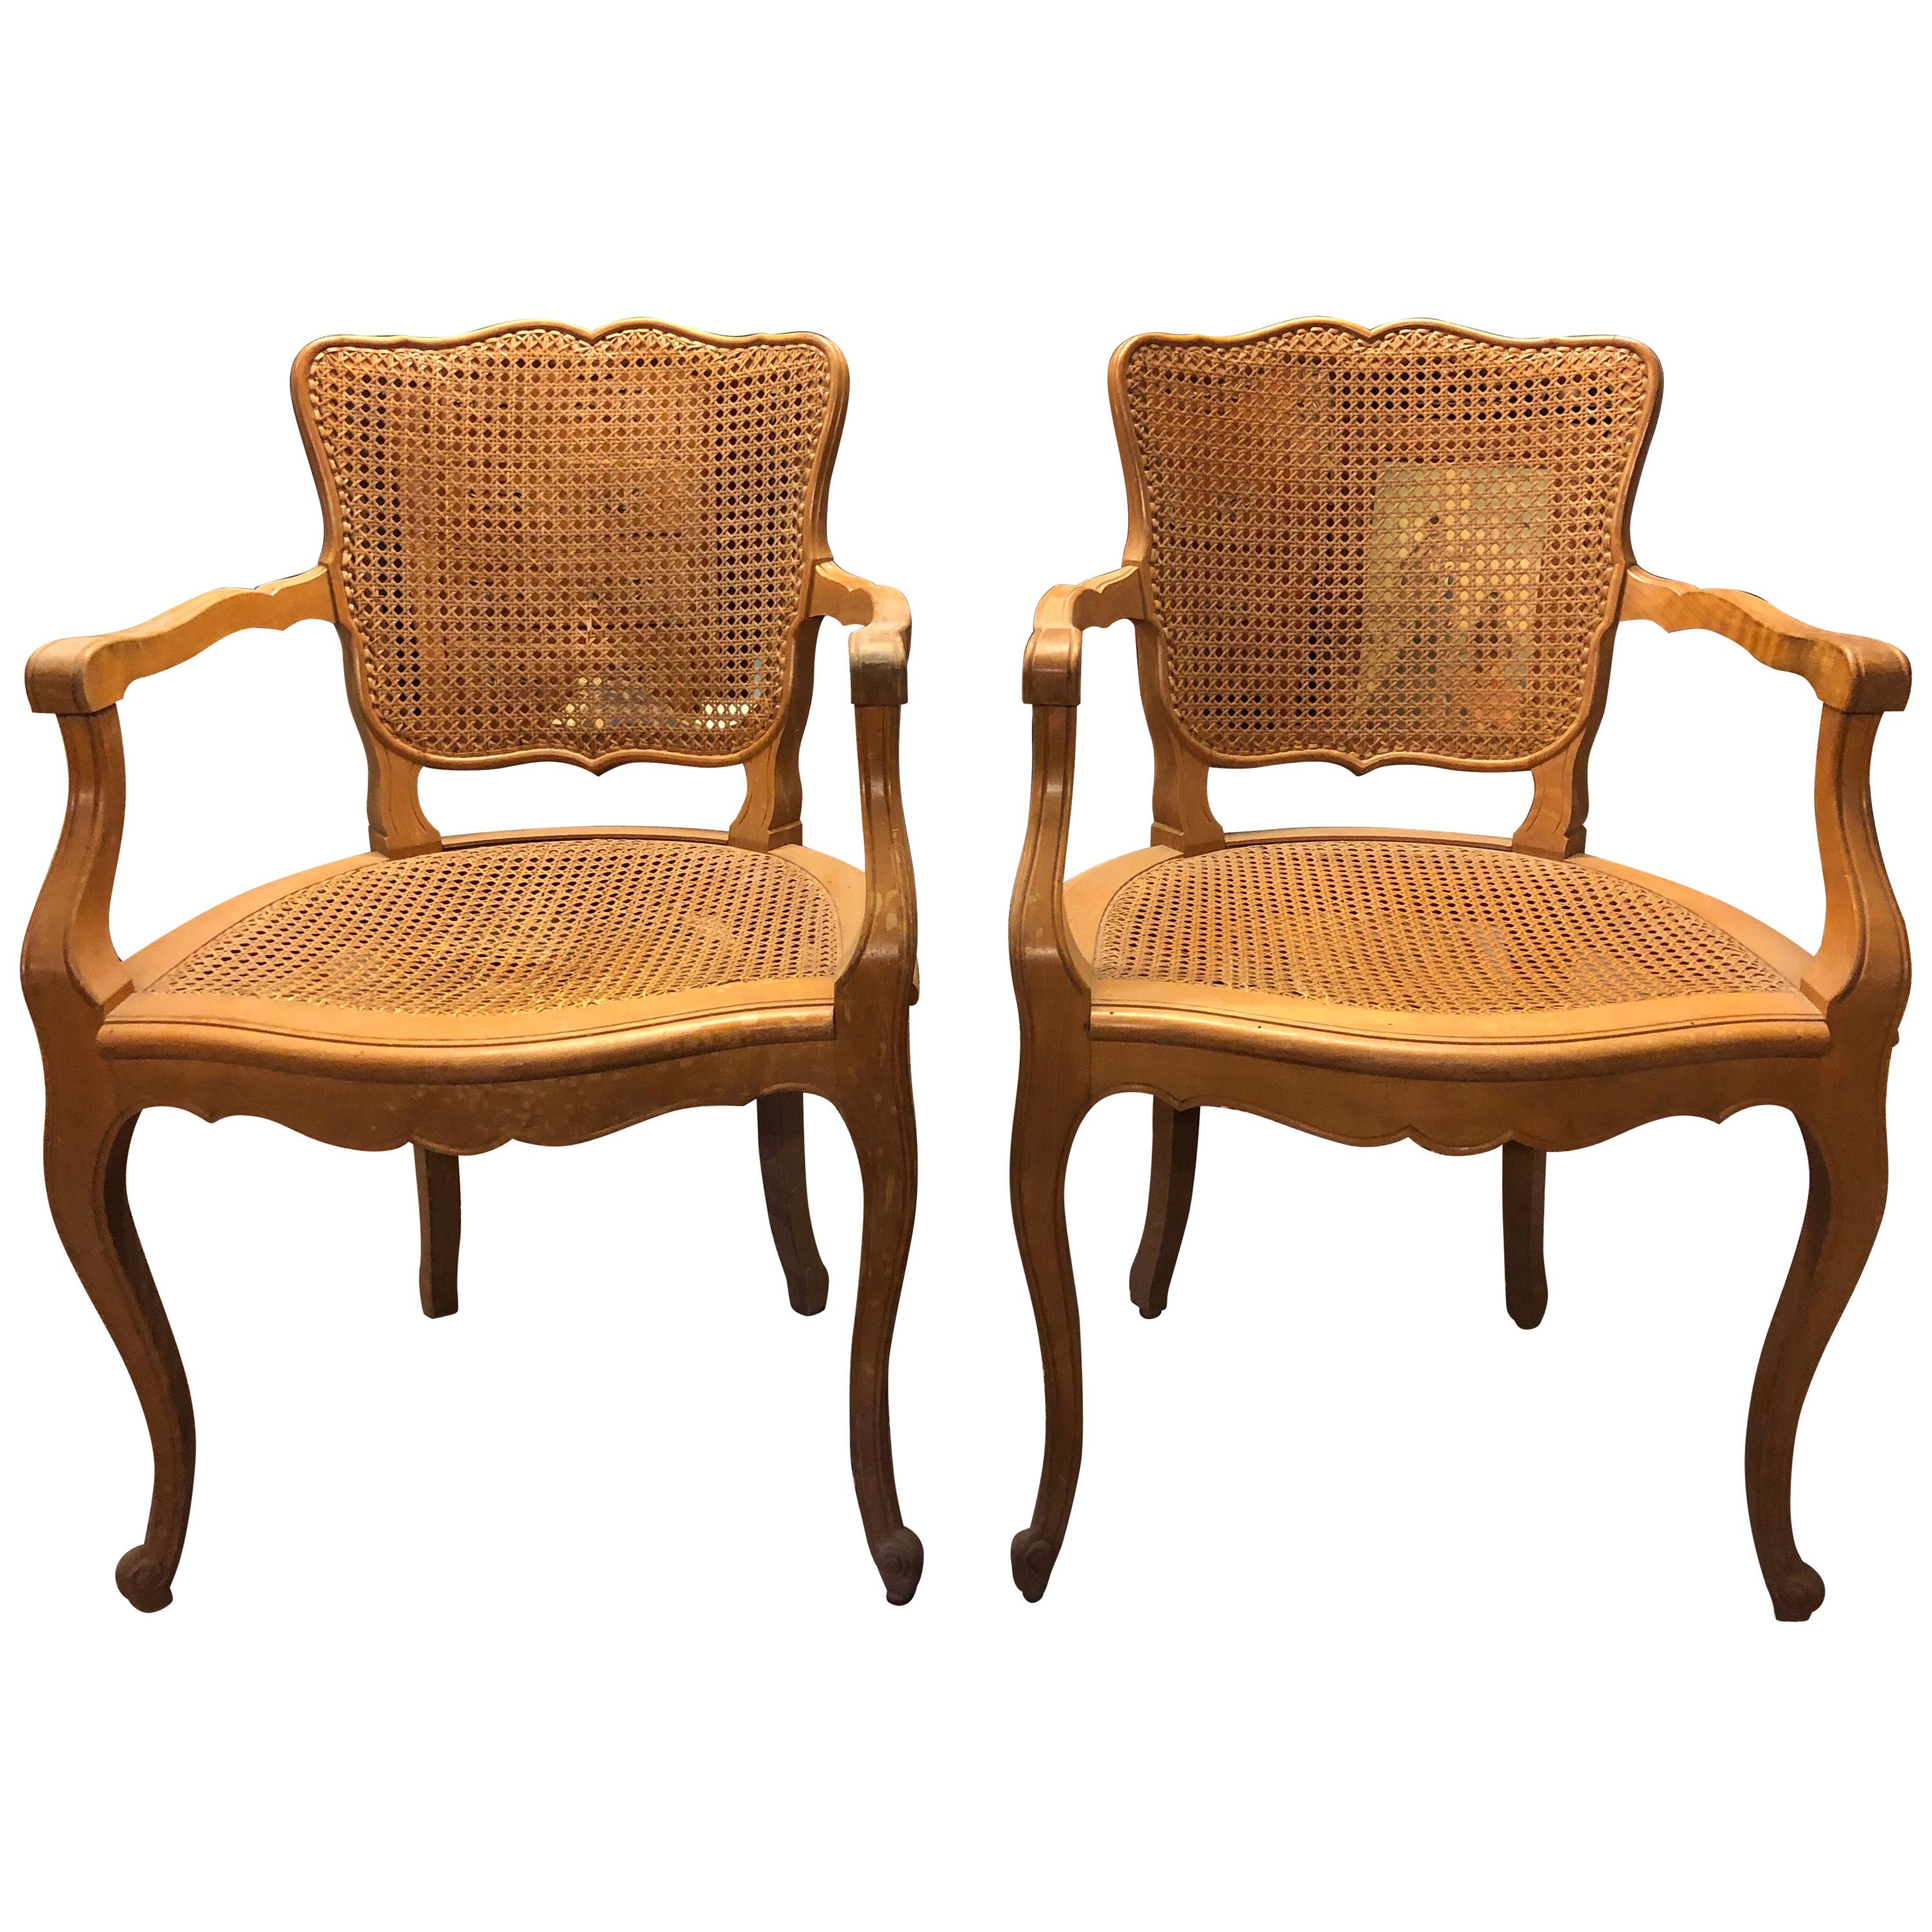 Pair of French Cane Armchairs